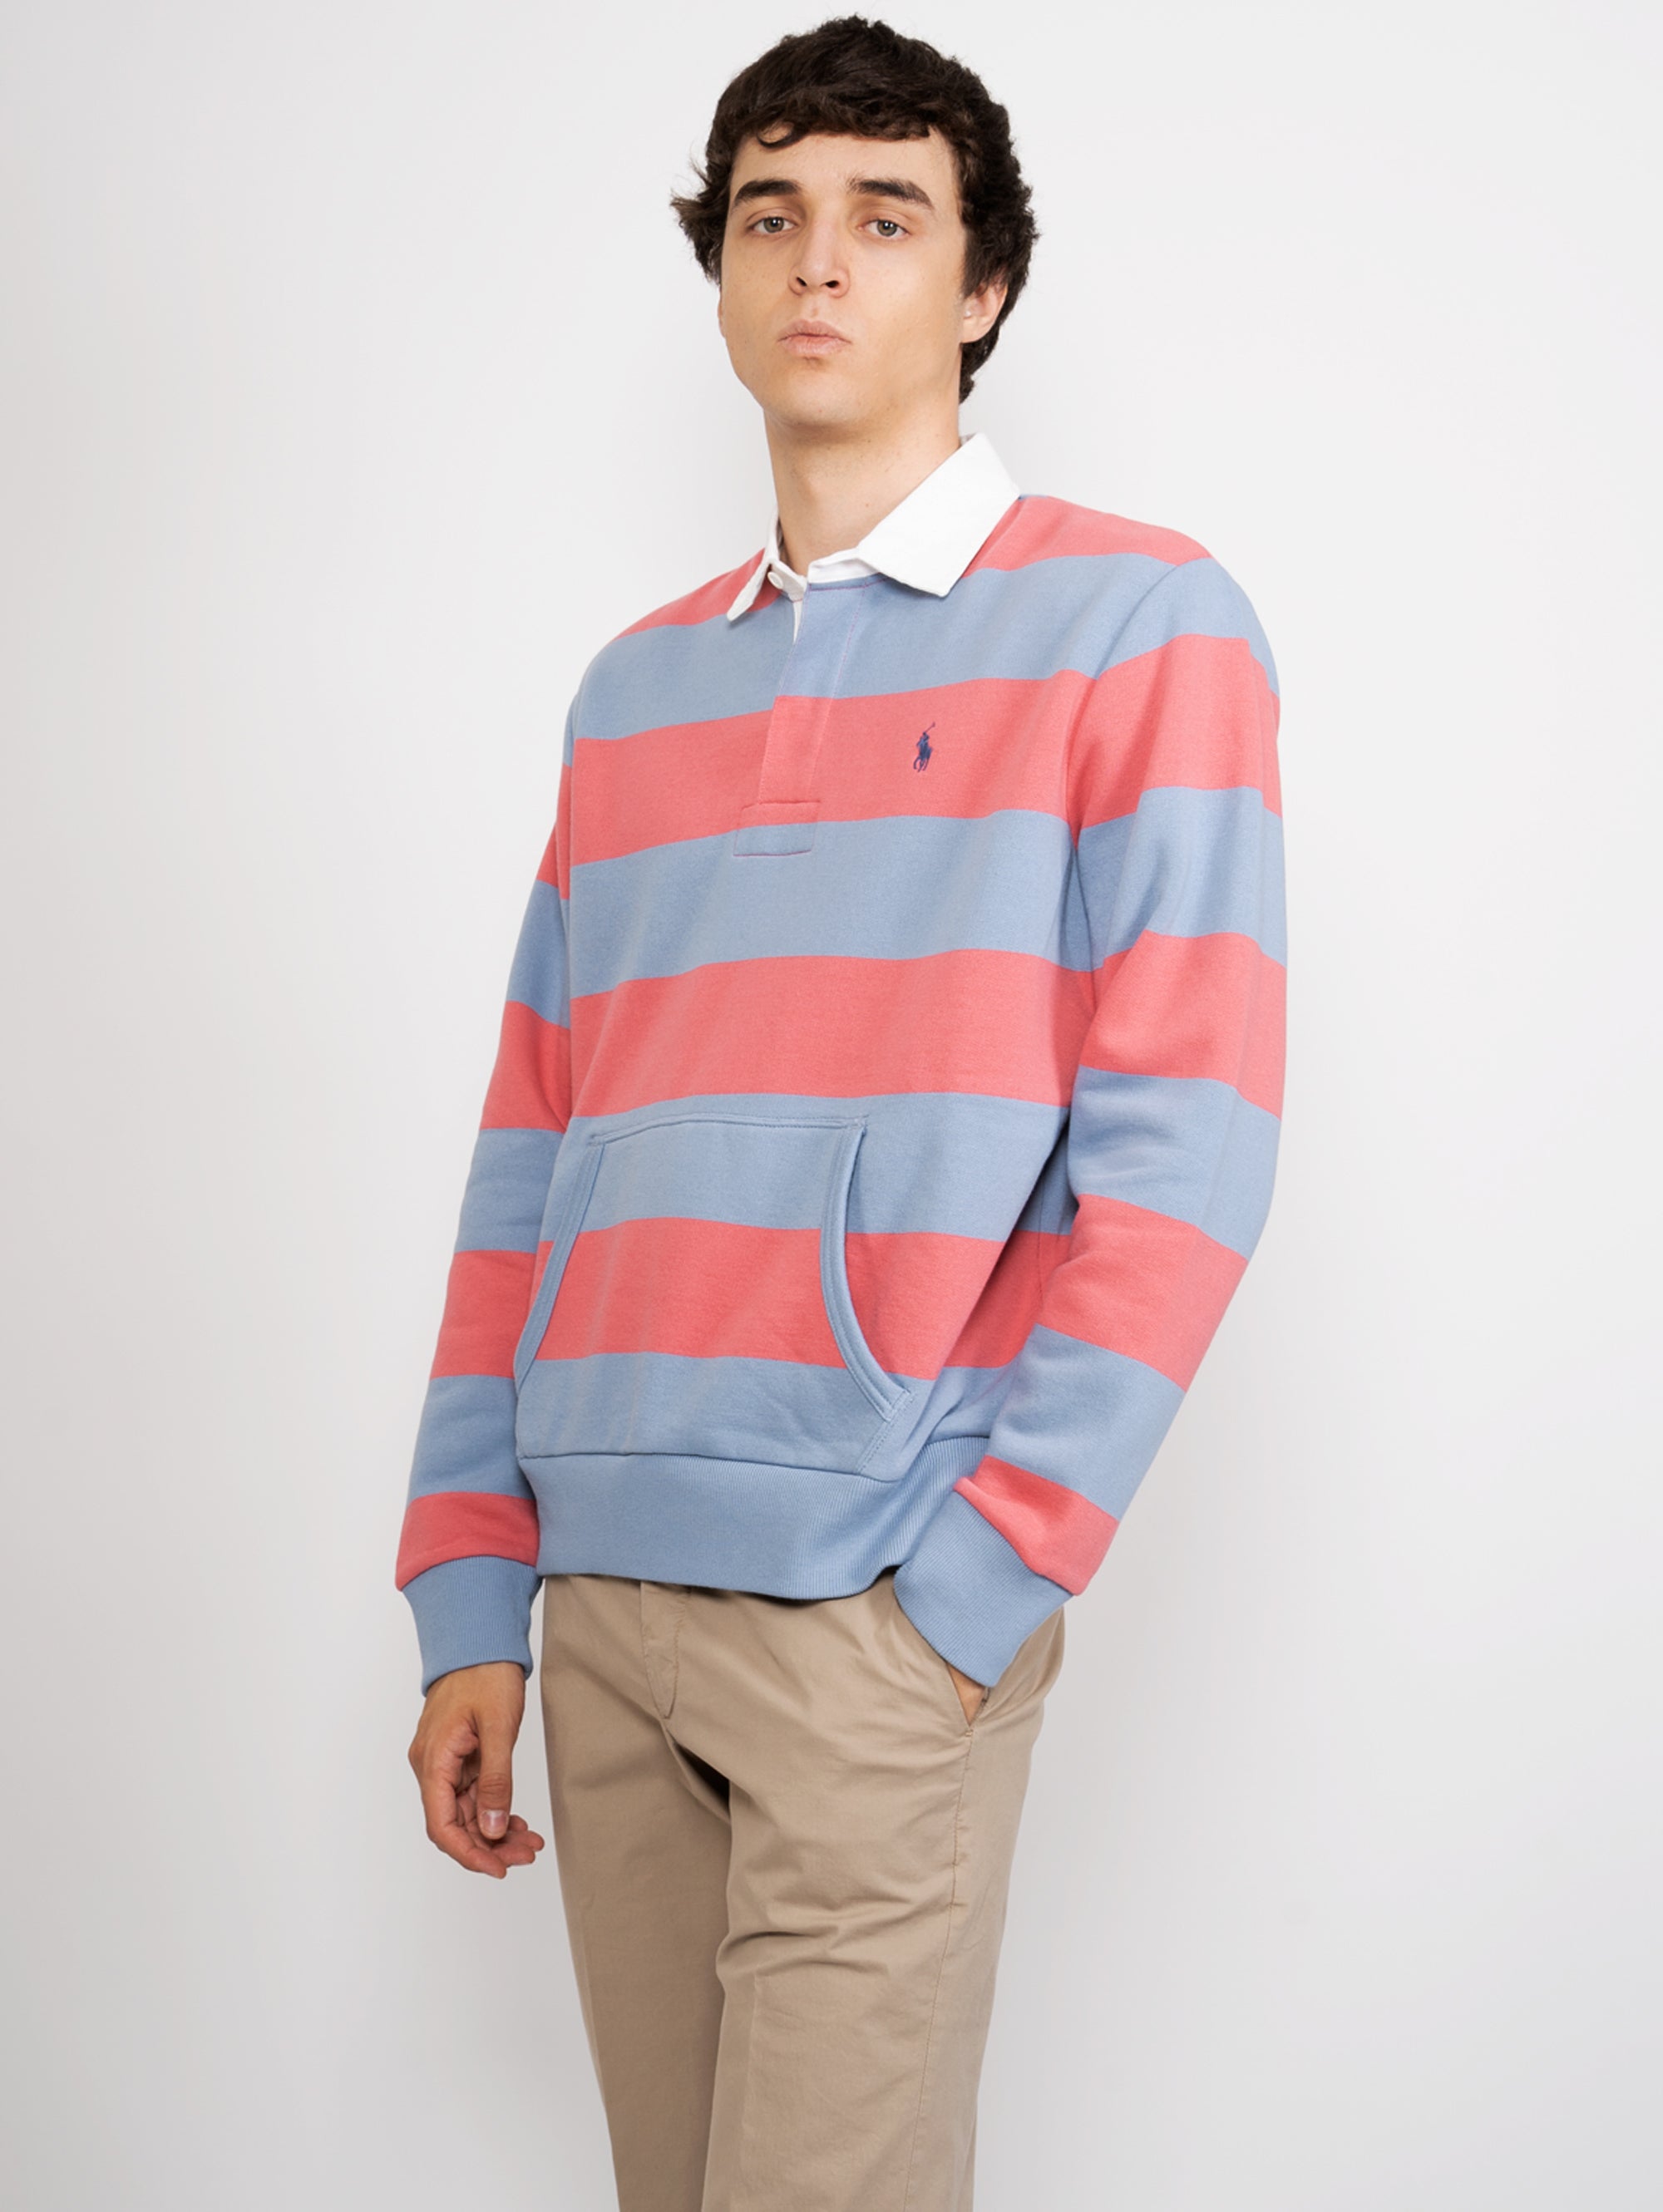 Red / Blue Striped Rugby Style Sweatshirt